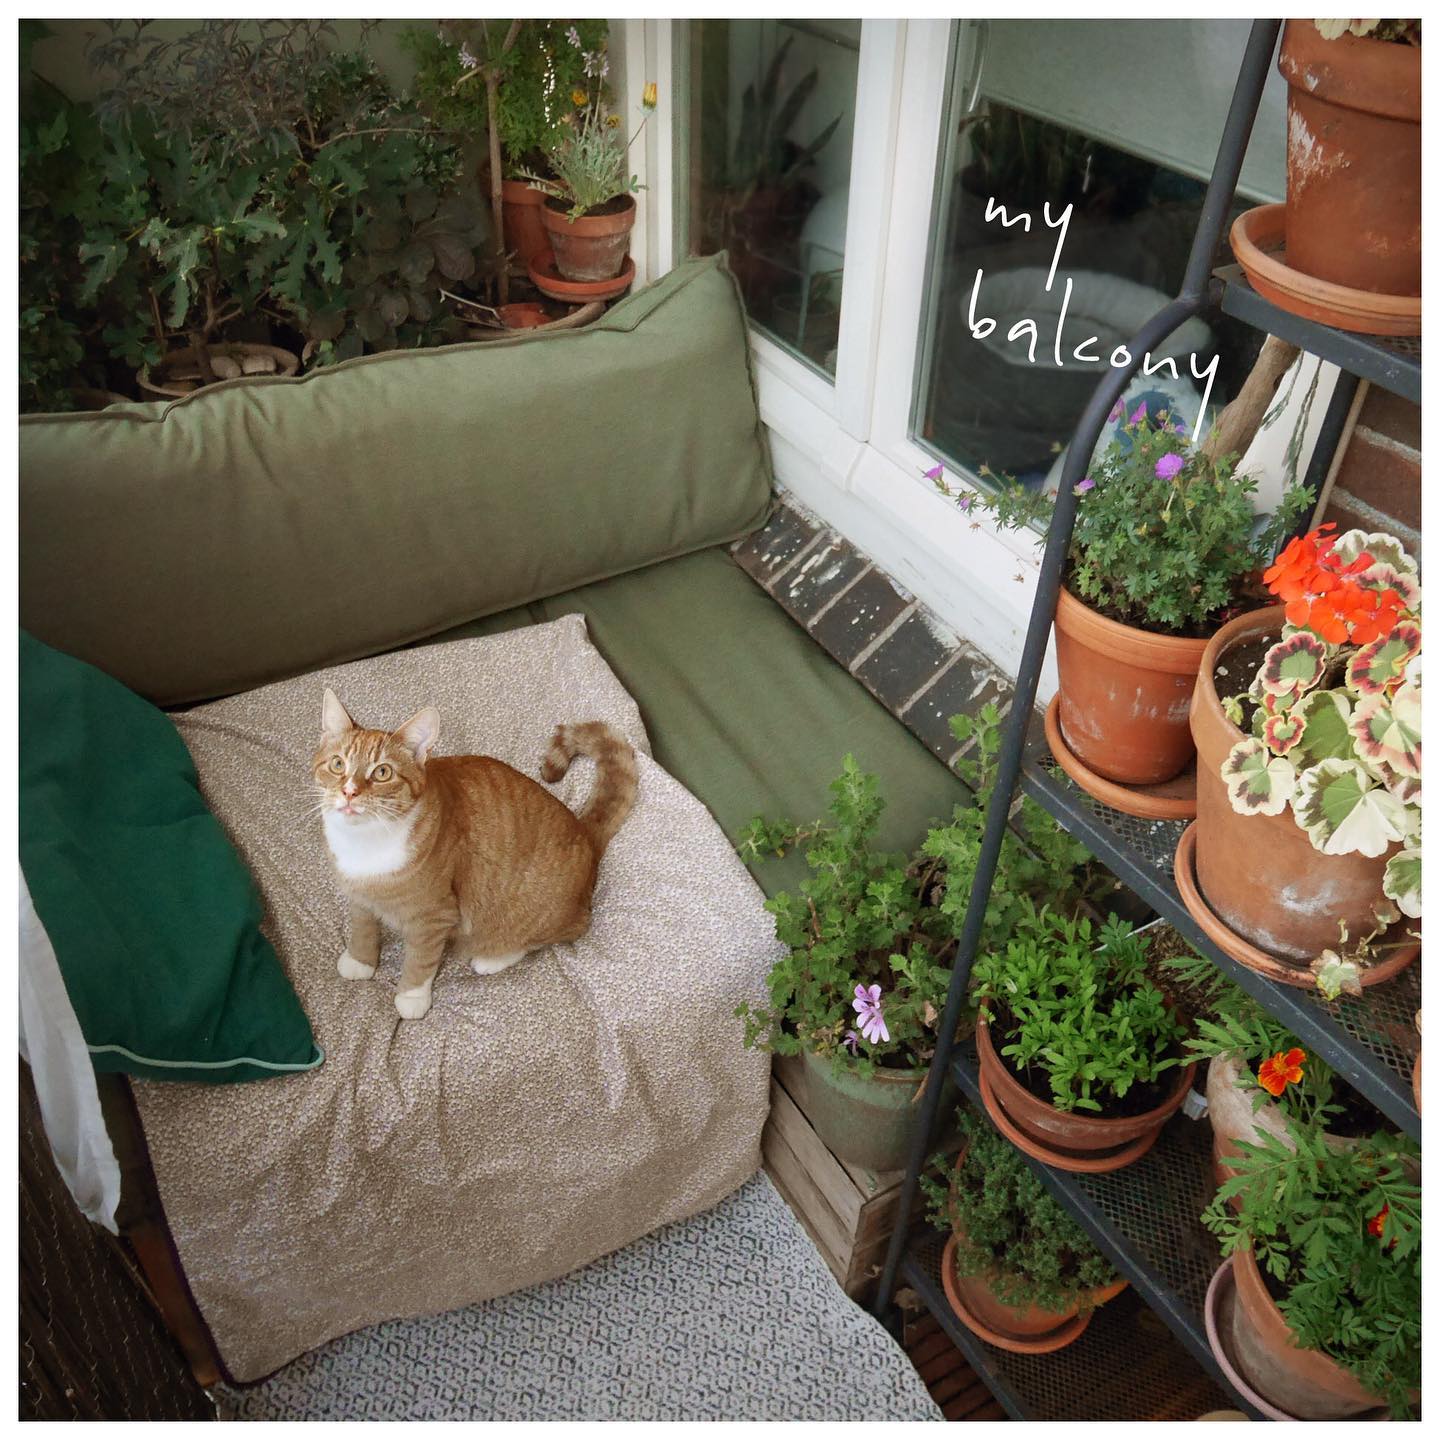 At the end of the day, if the weather is even a little bit kind, i love to unwind on my balcony. I am lucky that the garden in my block is quite peaceful (by Amsterdam measures)

One issue, if i even get up for a minute, there is always a cat ready to steal my spot on the sofa.